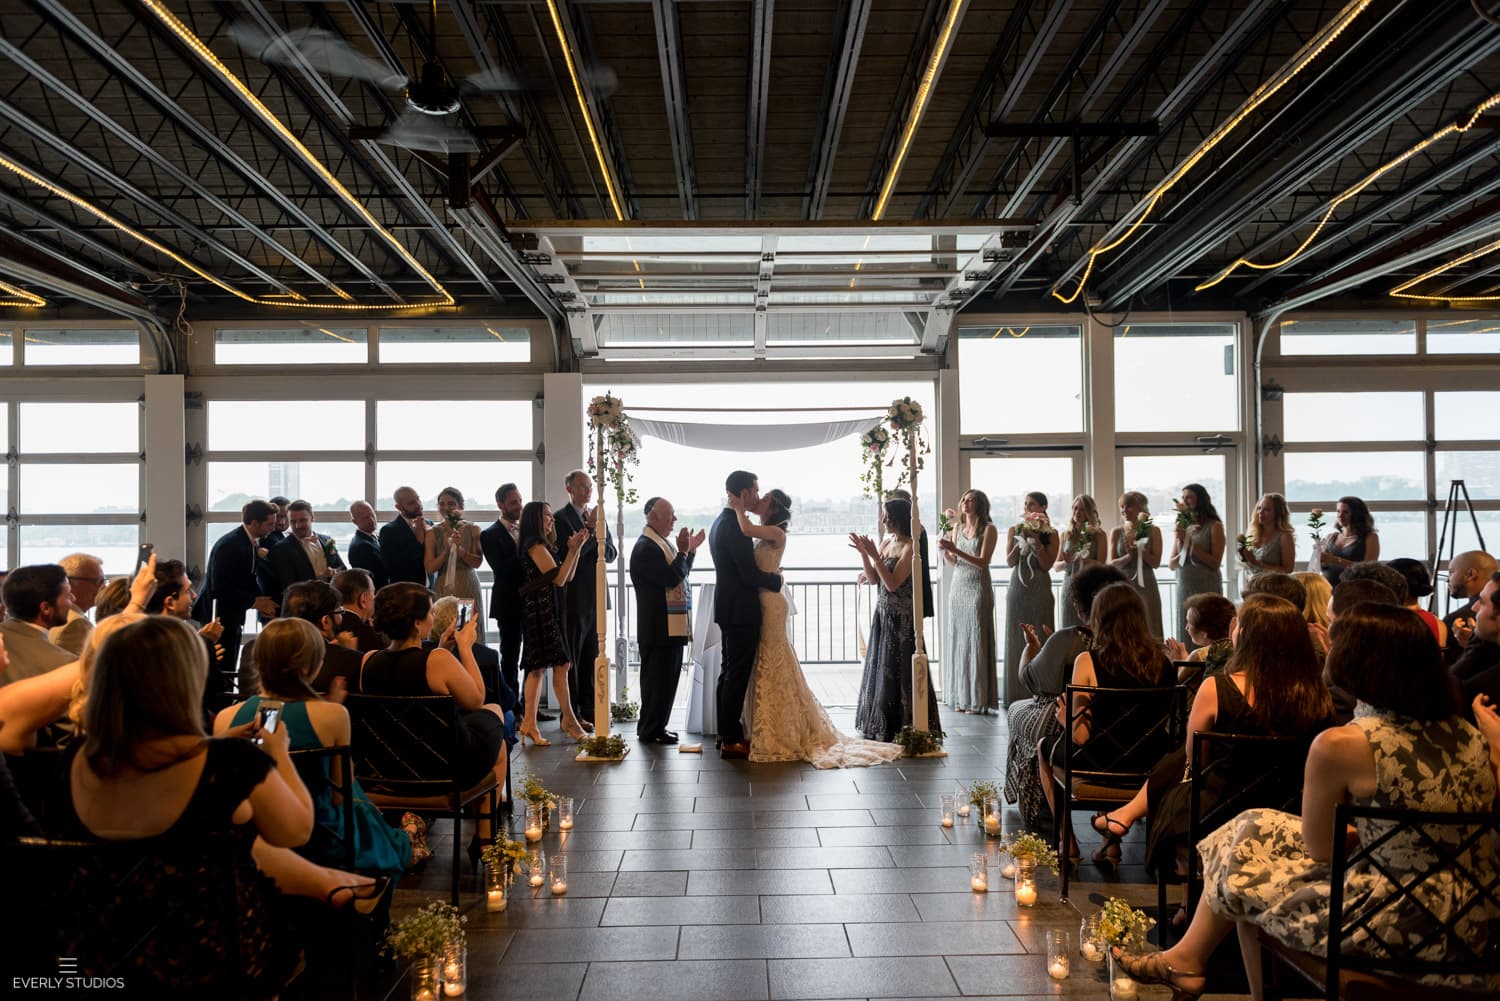 Chelsea Piers Sunset Terrace wedding in NYC